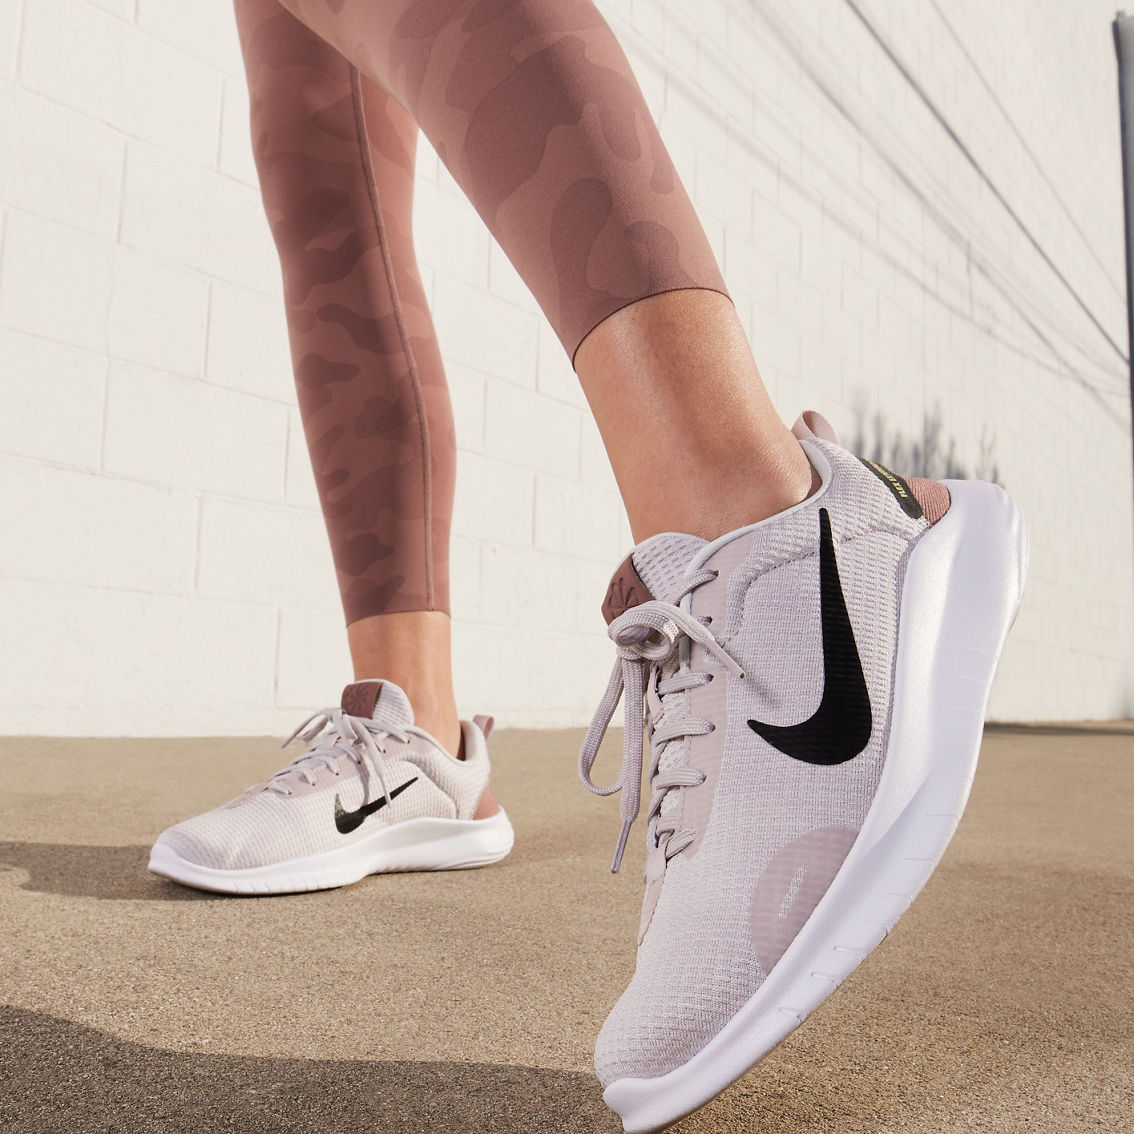 Nike Women's Flex Experience RN 12 Running Shoes - Image 9 of 9